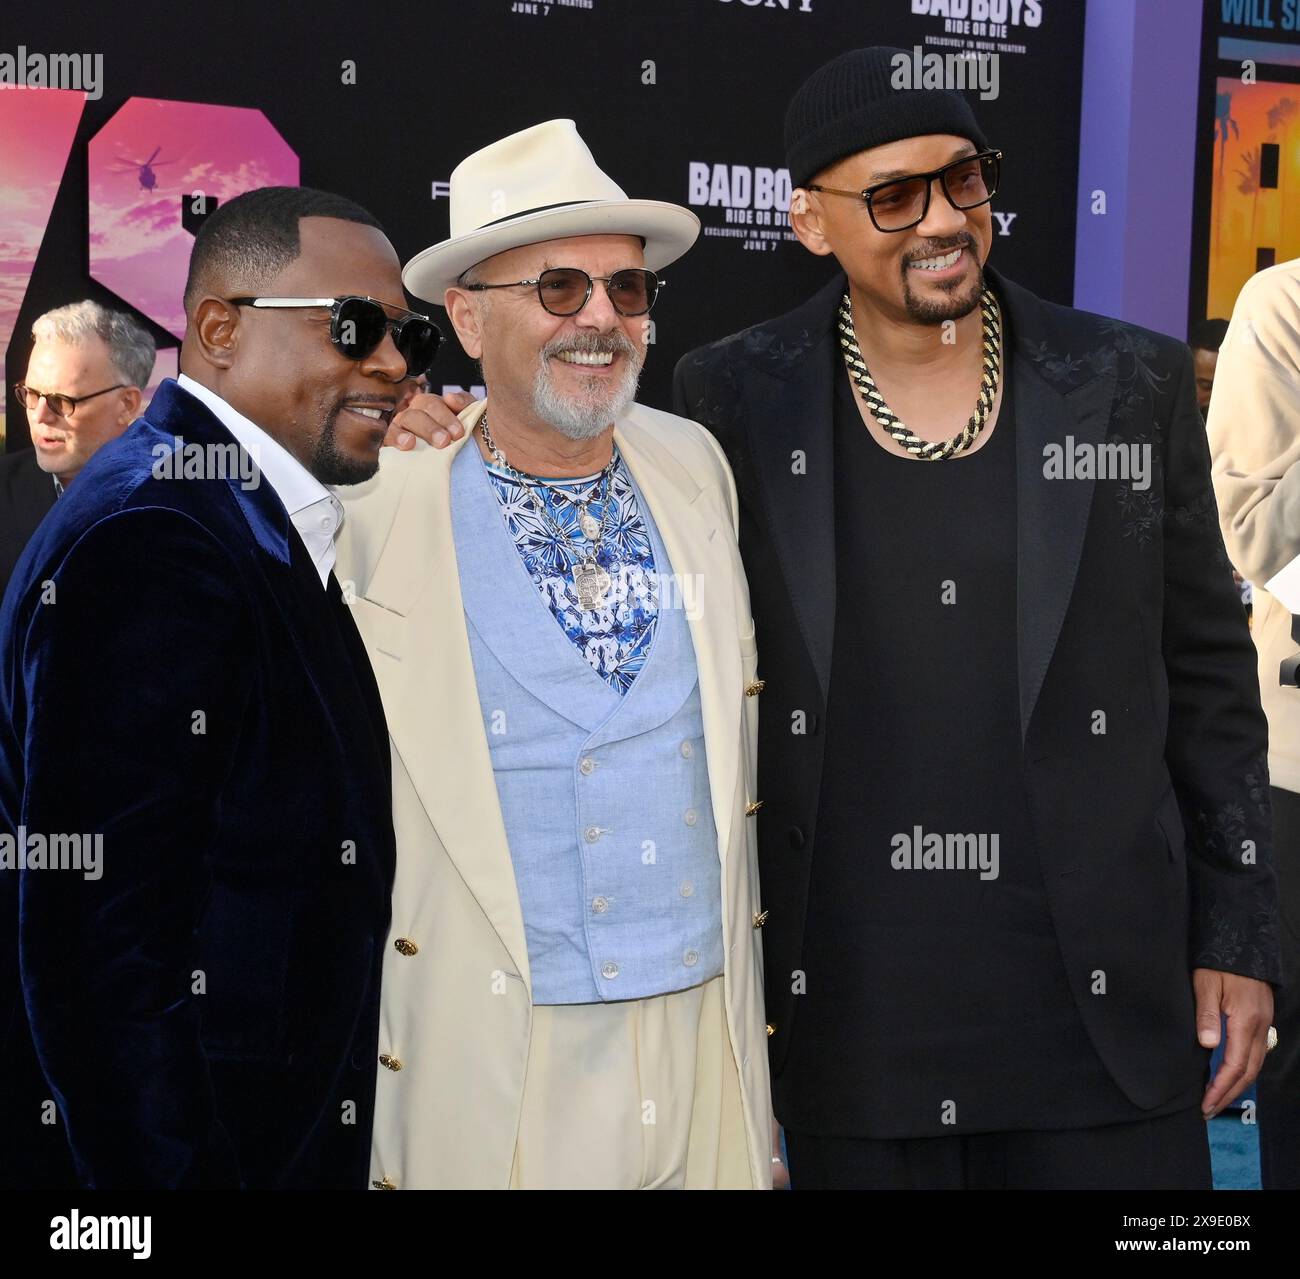 Los Angeles, United States. 30th May, 2024. Cast members Martin Lawrence, Joe Pantoliano and Will Smith (L-R) attend the premiere of the motion picture crime thriller comedy 'Bad Boys: Ride or Die' at the TCL Chinese Theatre in the Hollywood section of Los Angeles on Thursday, May 20, 2024. Storyline: When their former captain is implicated in corruption, two Miami police officers have to work to clear his name. Photo by Jim Ruymen/UPI. Credit: UPI/Alamy Live News Stock Photo